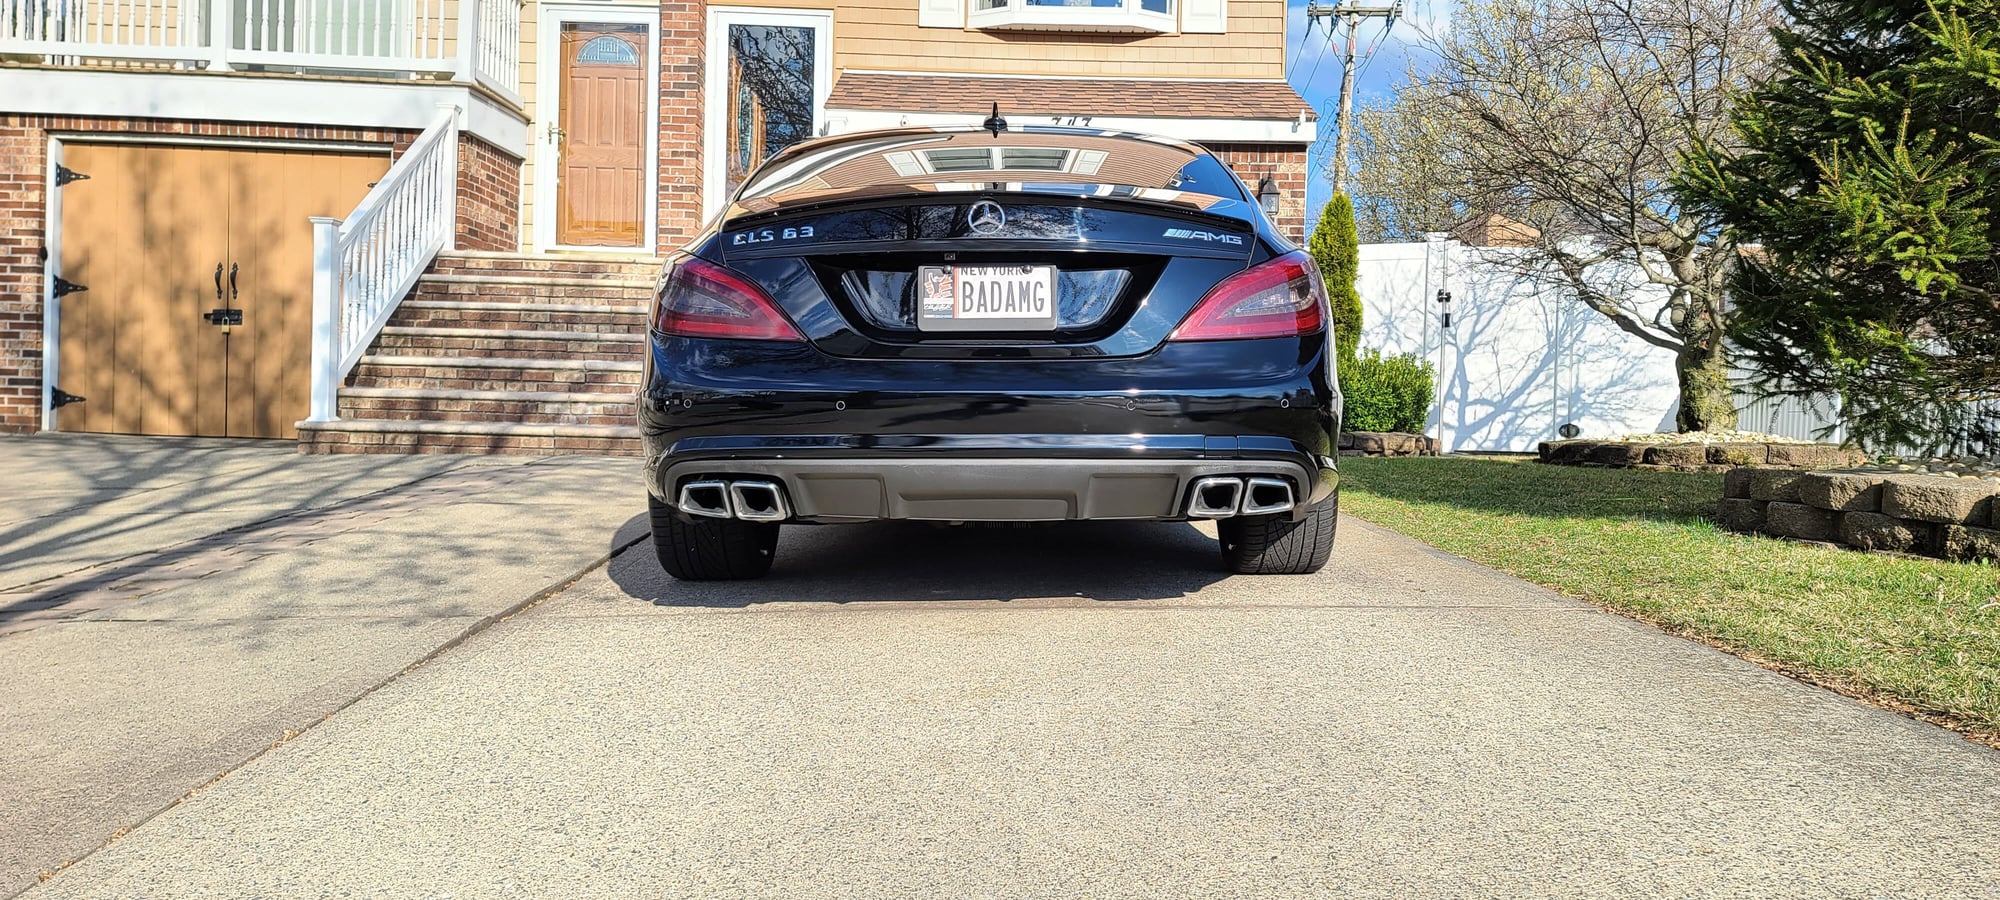 2013 Mercedes-Benz CLS63 AMG - 2013 CLS63 AMG Low Miles with Extended Warranty - Used - VIN WDDLJ7EB6DA079094 - 36,000 Miles - 8 cyl - 2WD - Automatic - Coupe - Black - Staten Island, NY 10312, United States